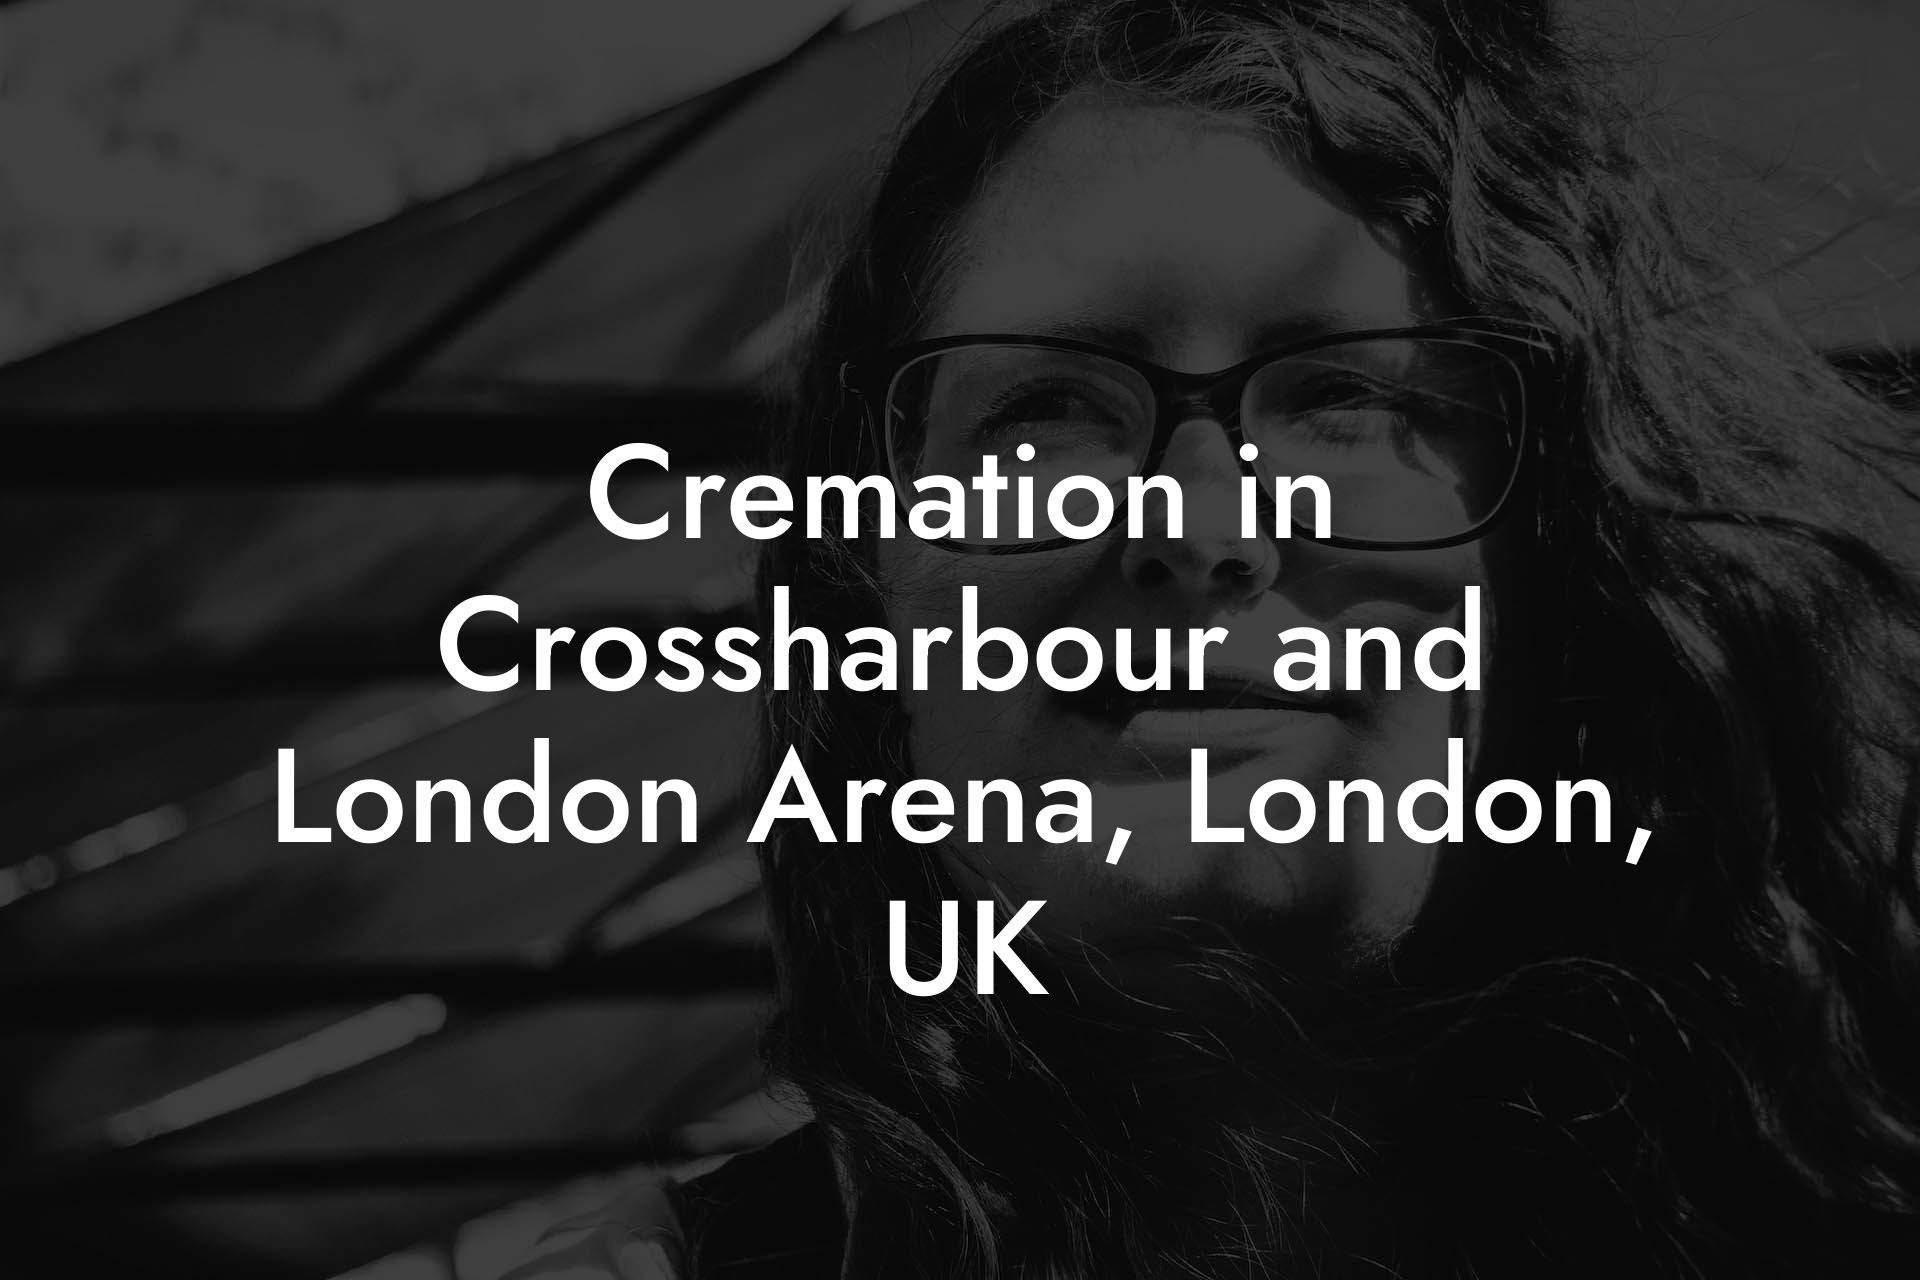 Cremation in Crossharbour and London Arena, London, UK